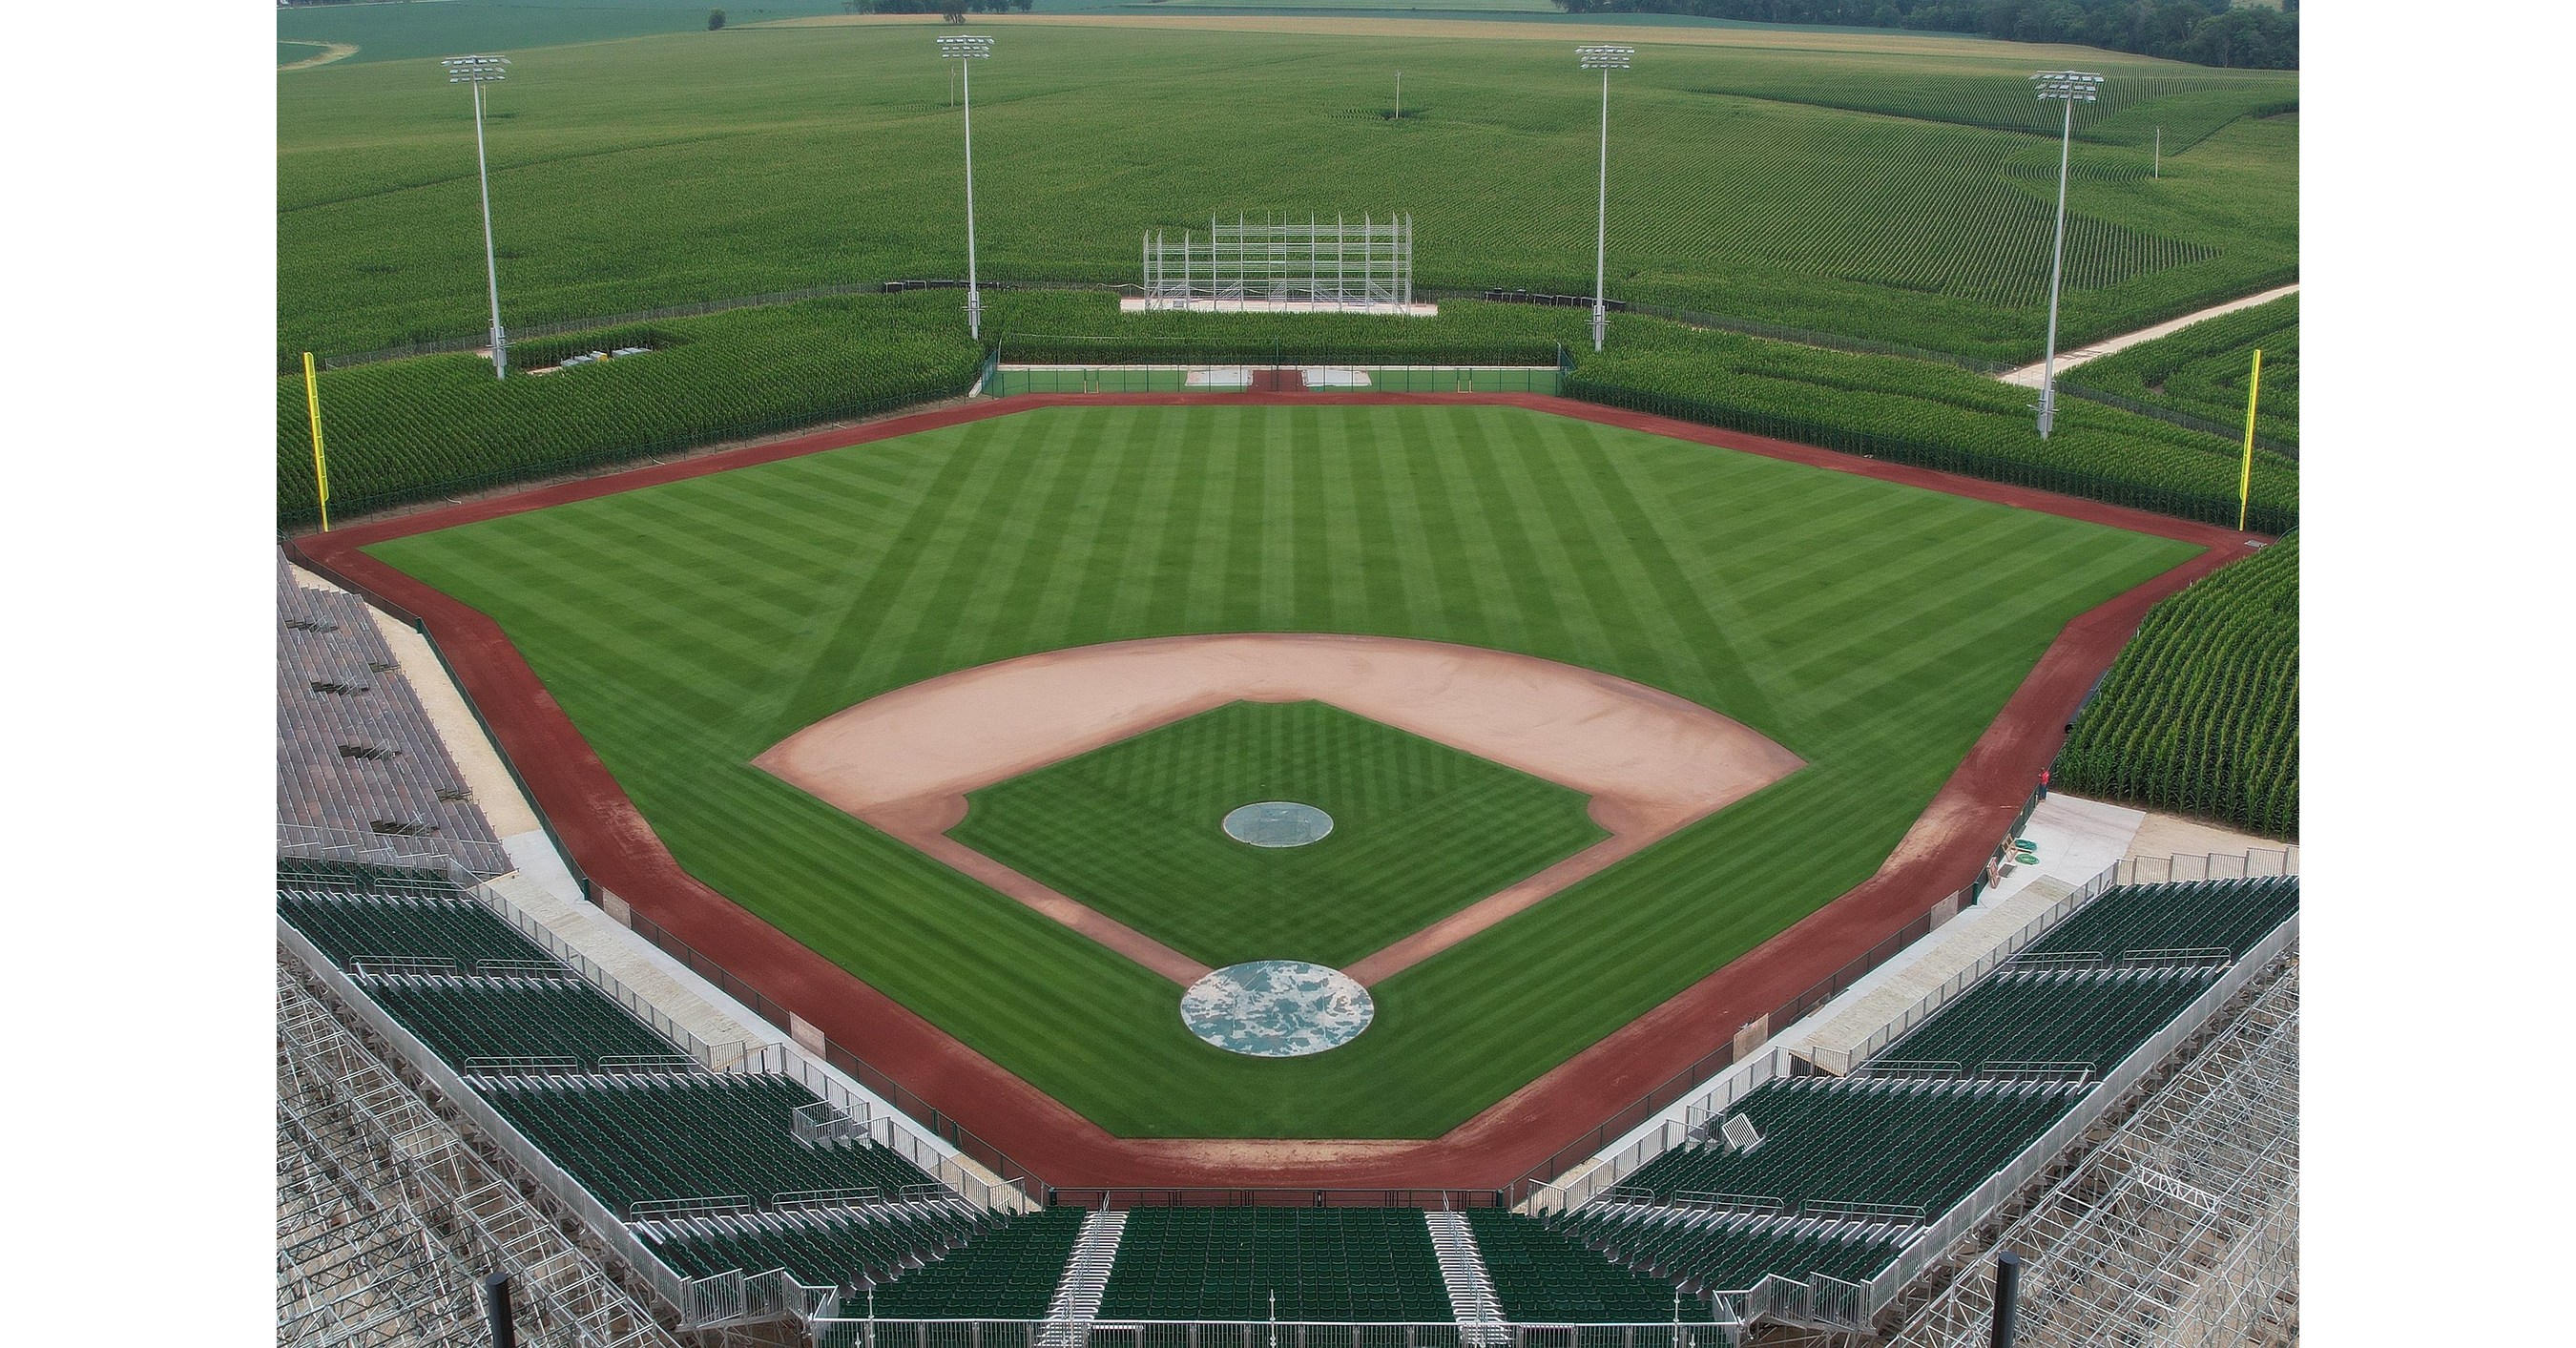 BrightView Prepares for MLB Field of Dreams Sequel